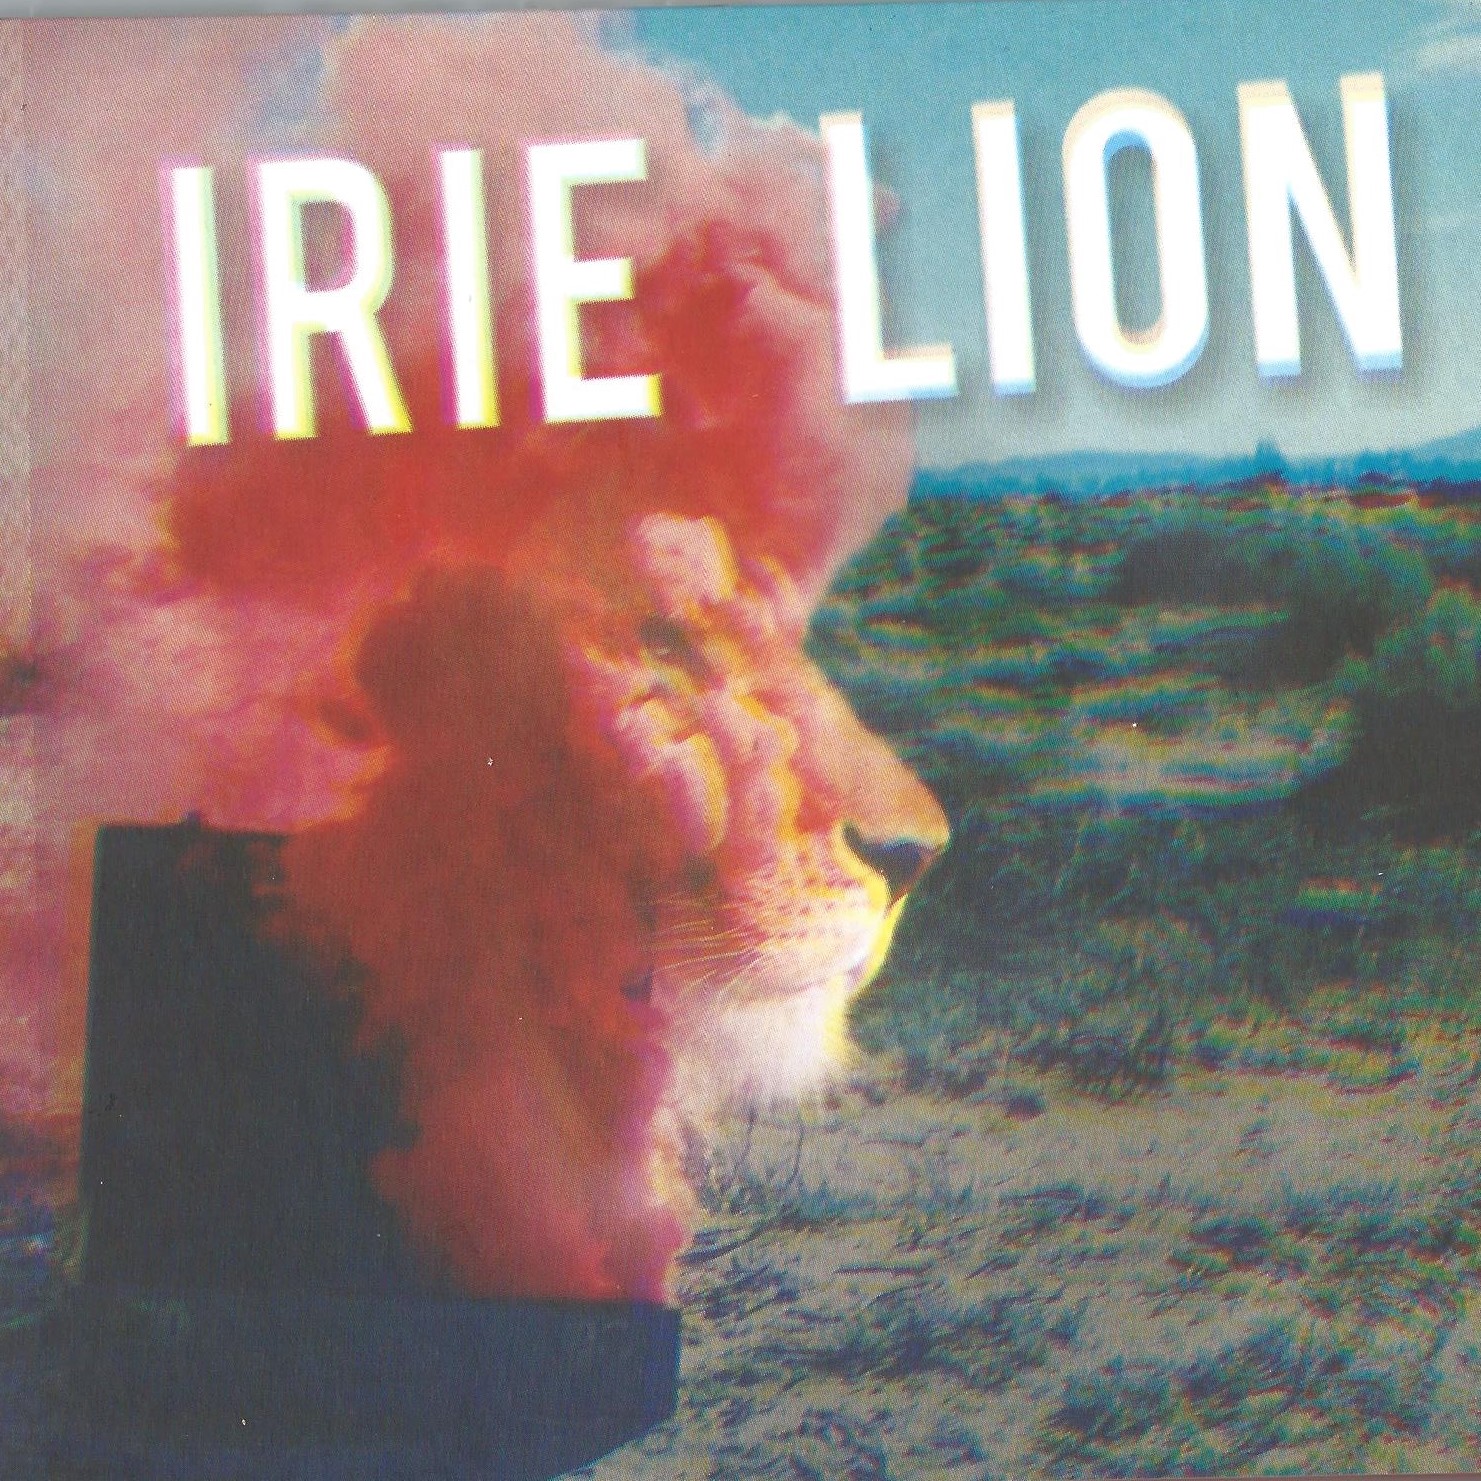 CD IRIE LION - ROCK & COME IN